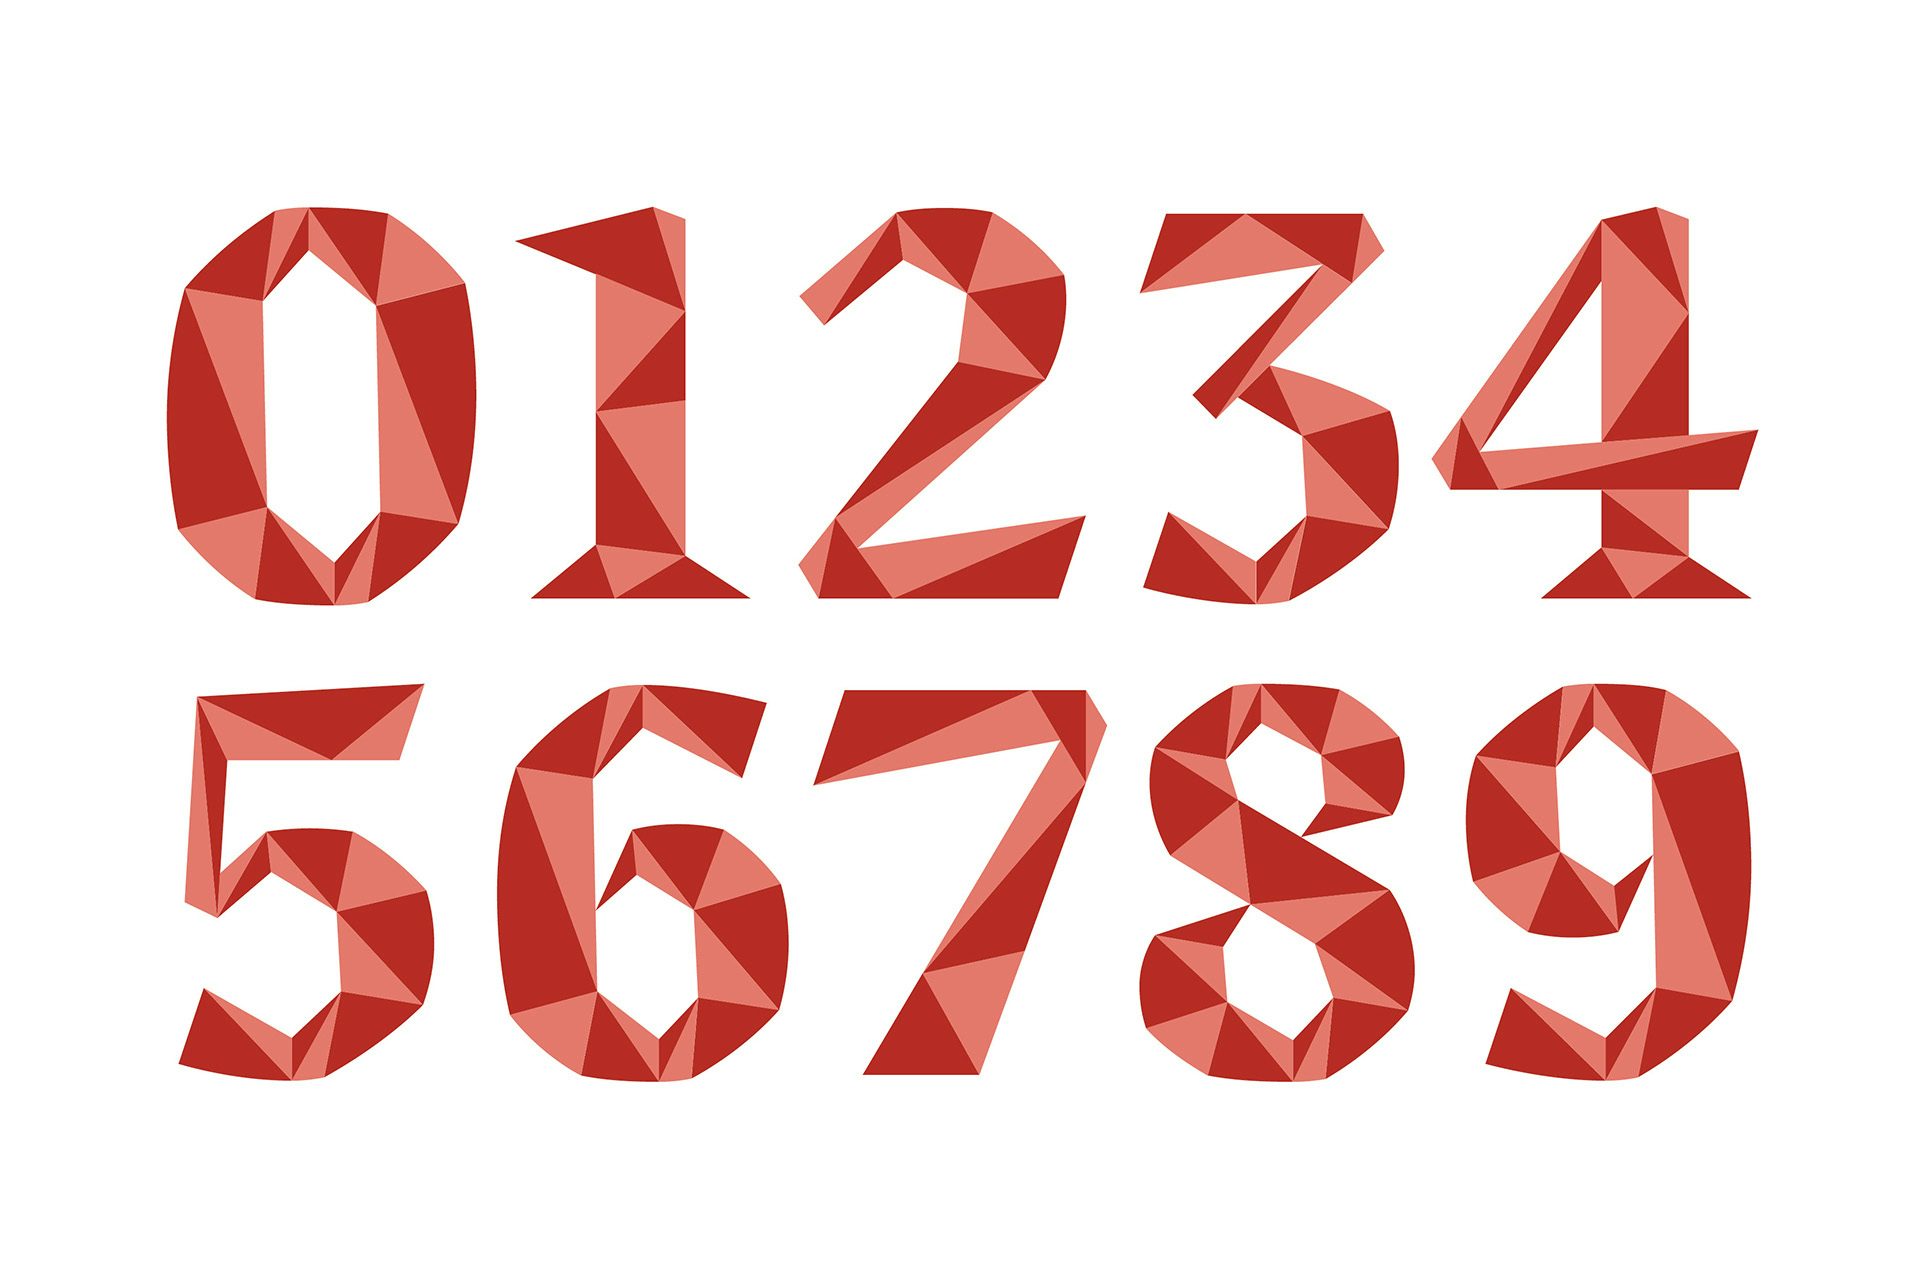 Graphic shows the numbers zero to nine designed in a red typeface comprising triangular shapes